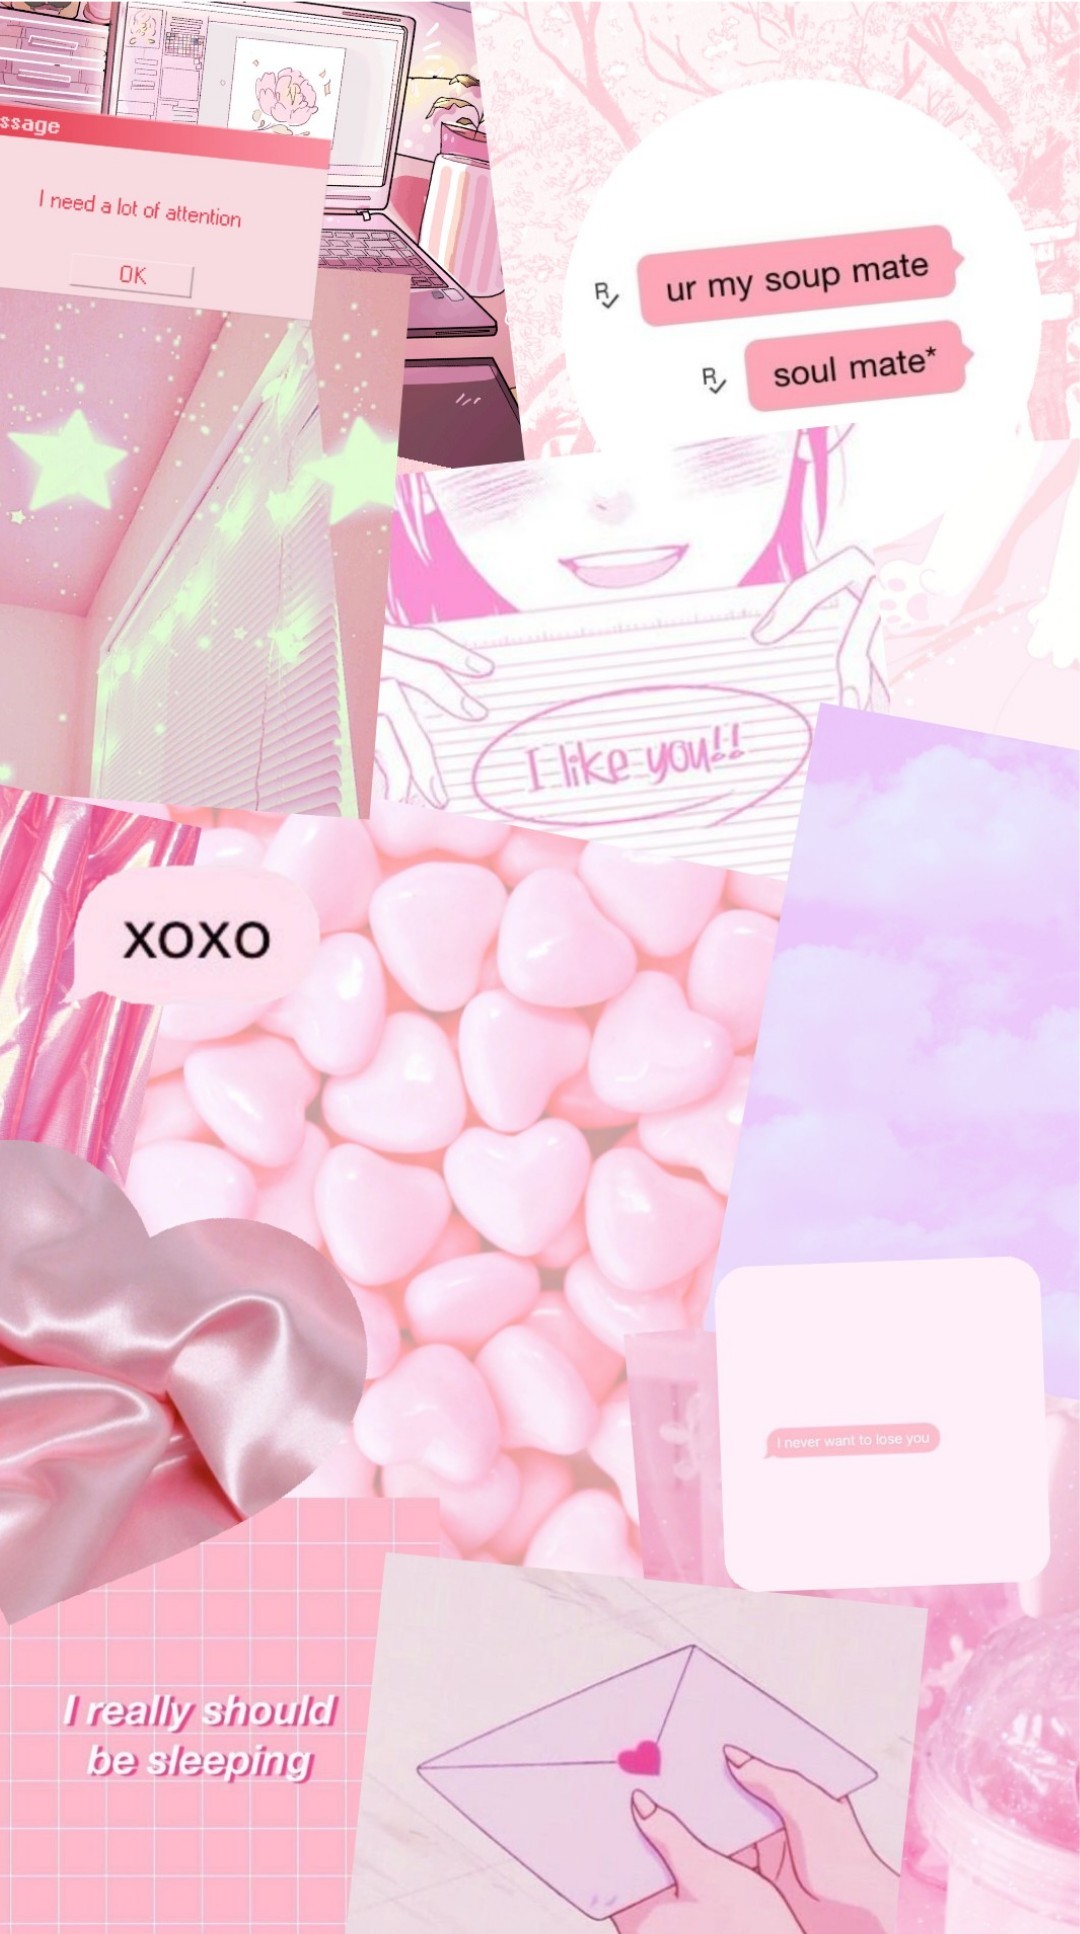 ♡tap♡
✨✨✨
I really like this pink aesthetic
✨✨✨
